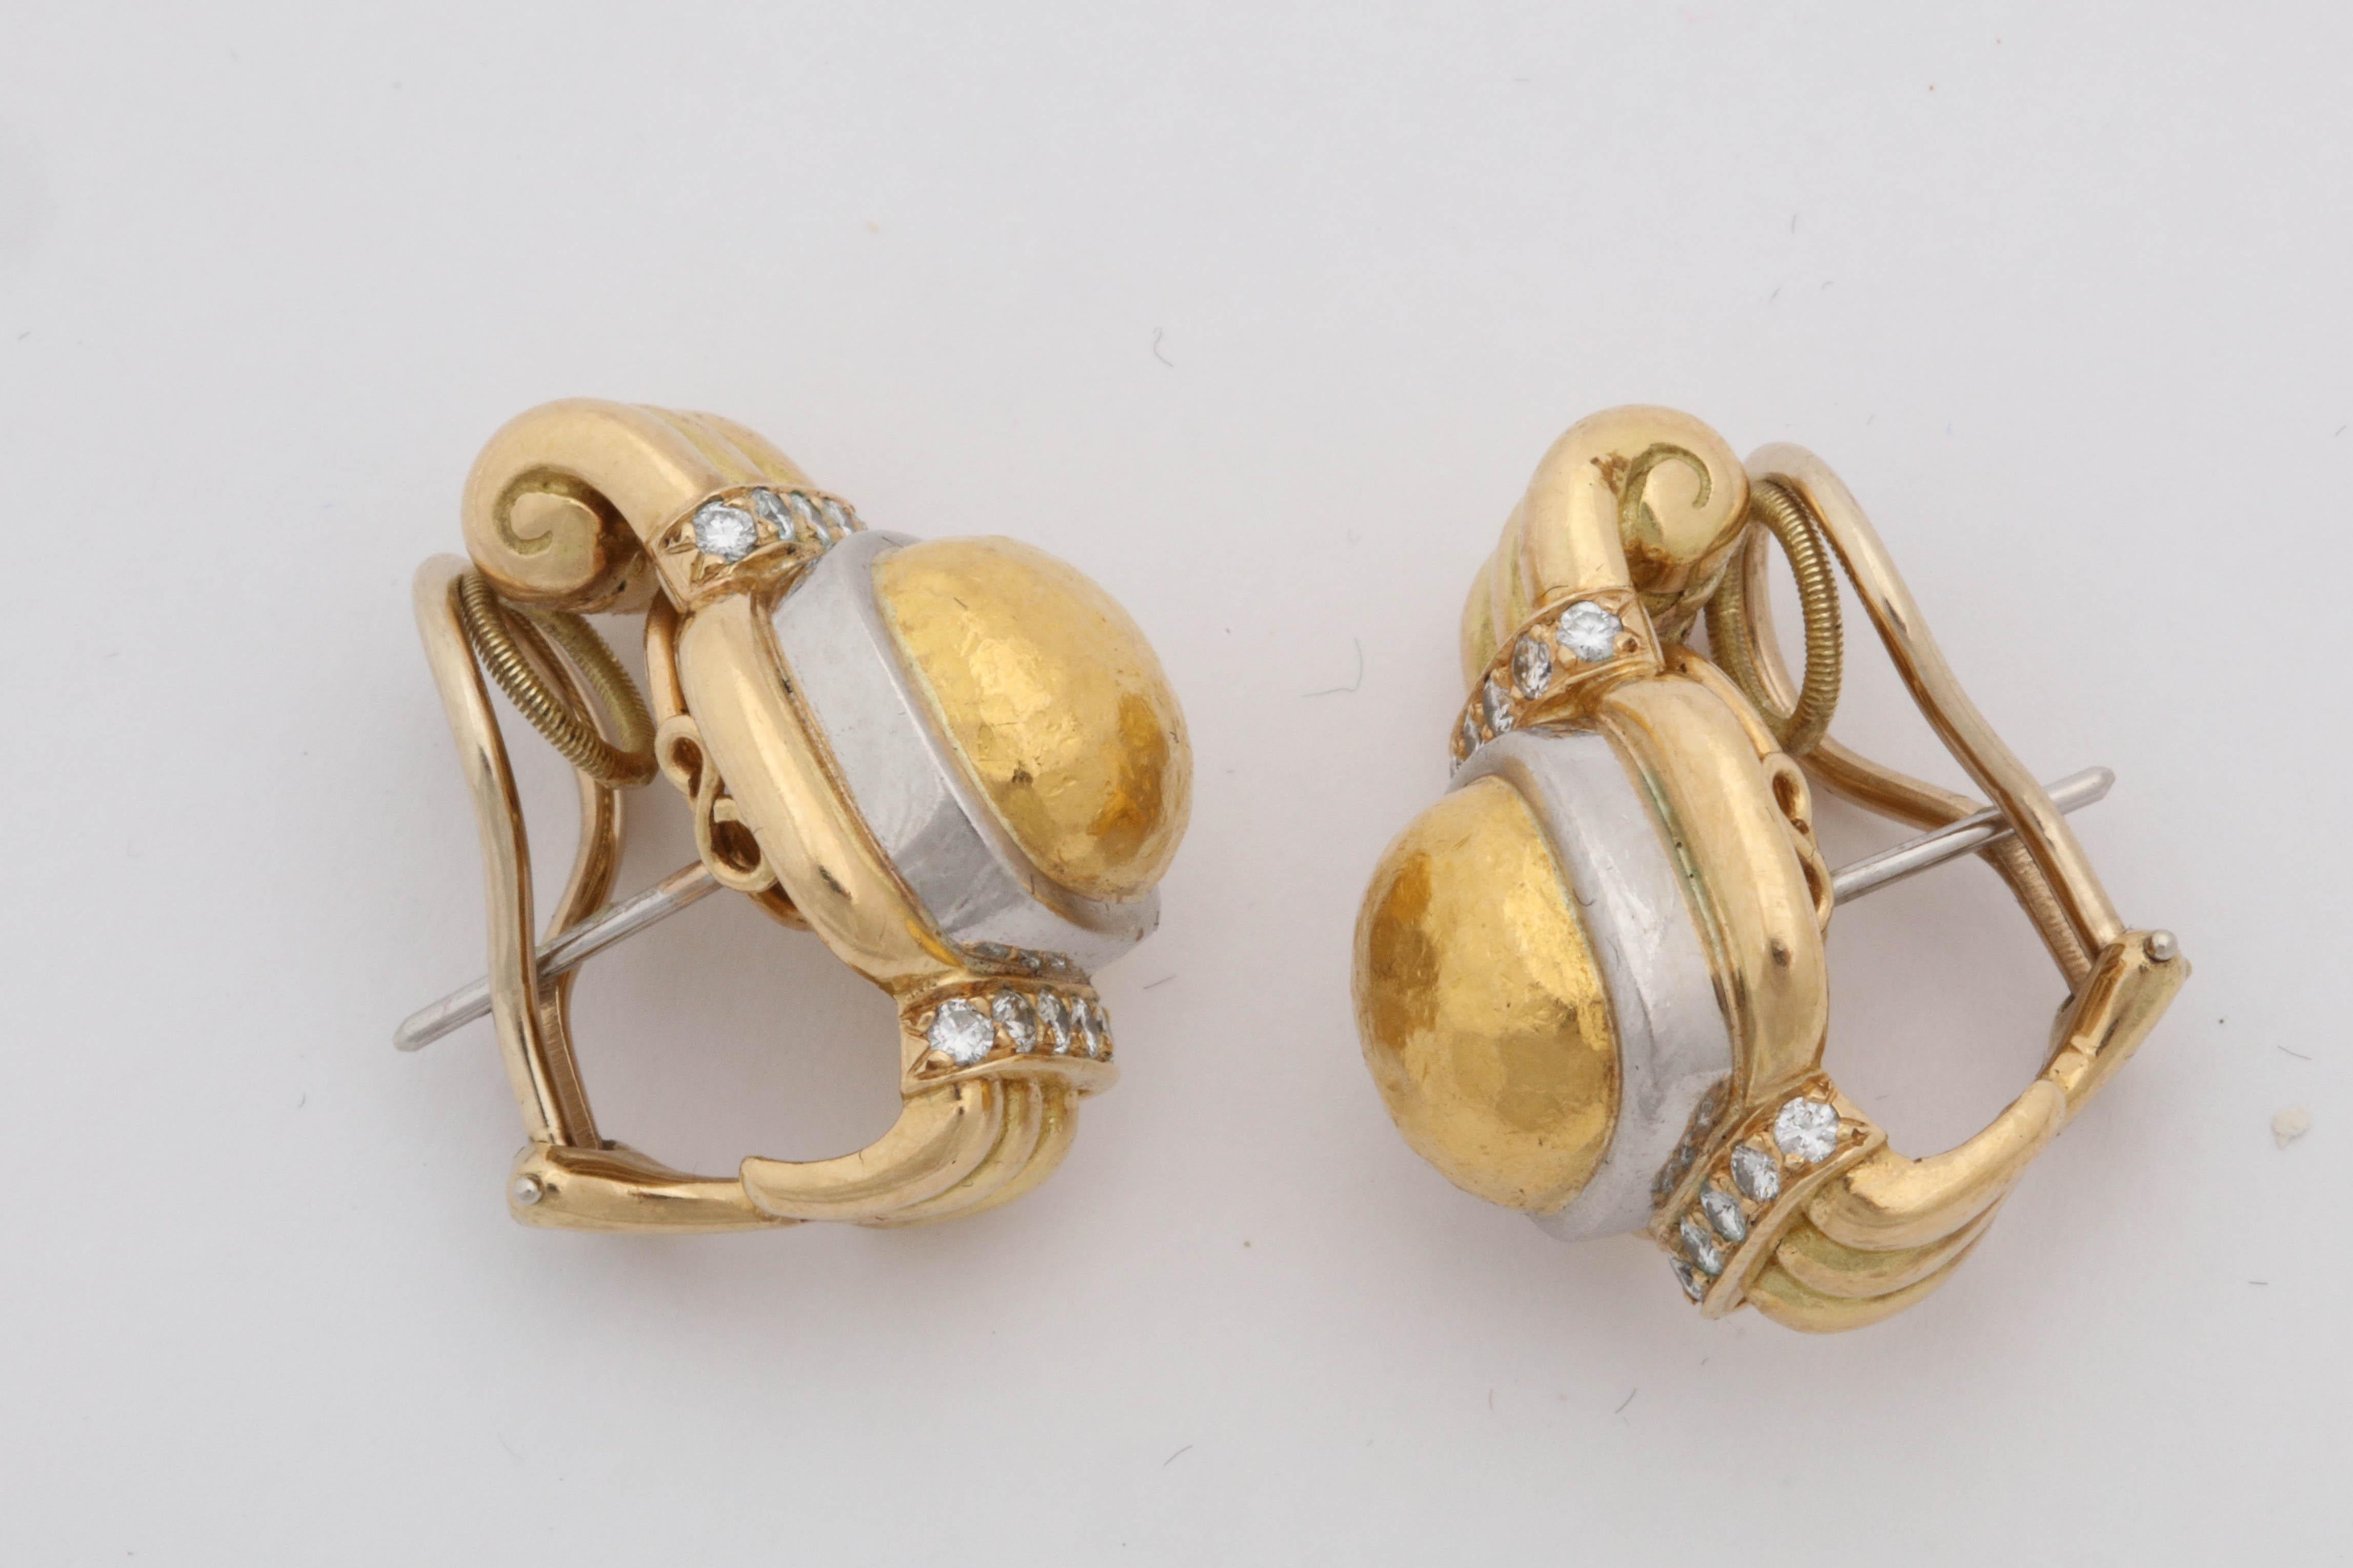 Chaumet Paris Hand-Hammered and High Polish Gold and Diamonds Earclips 2